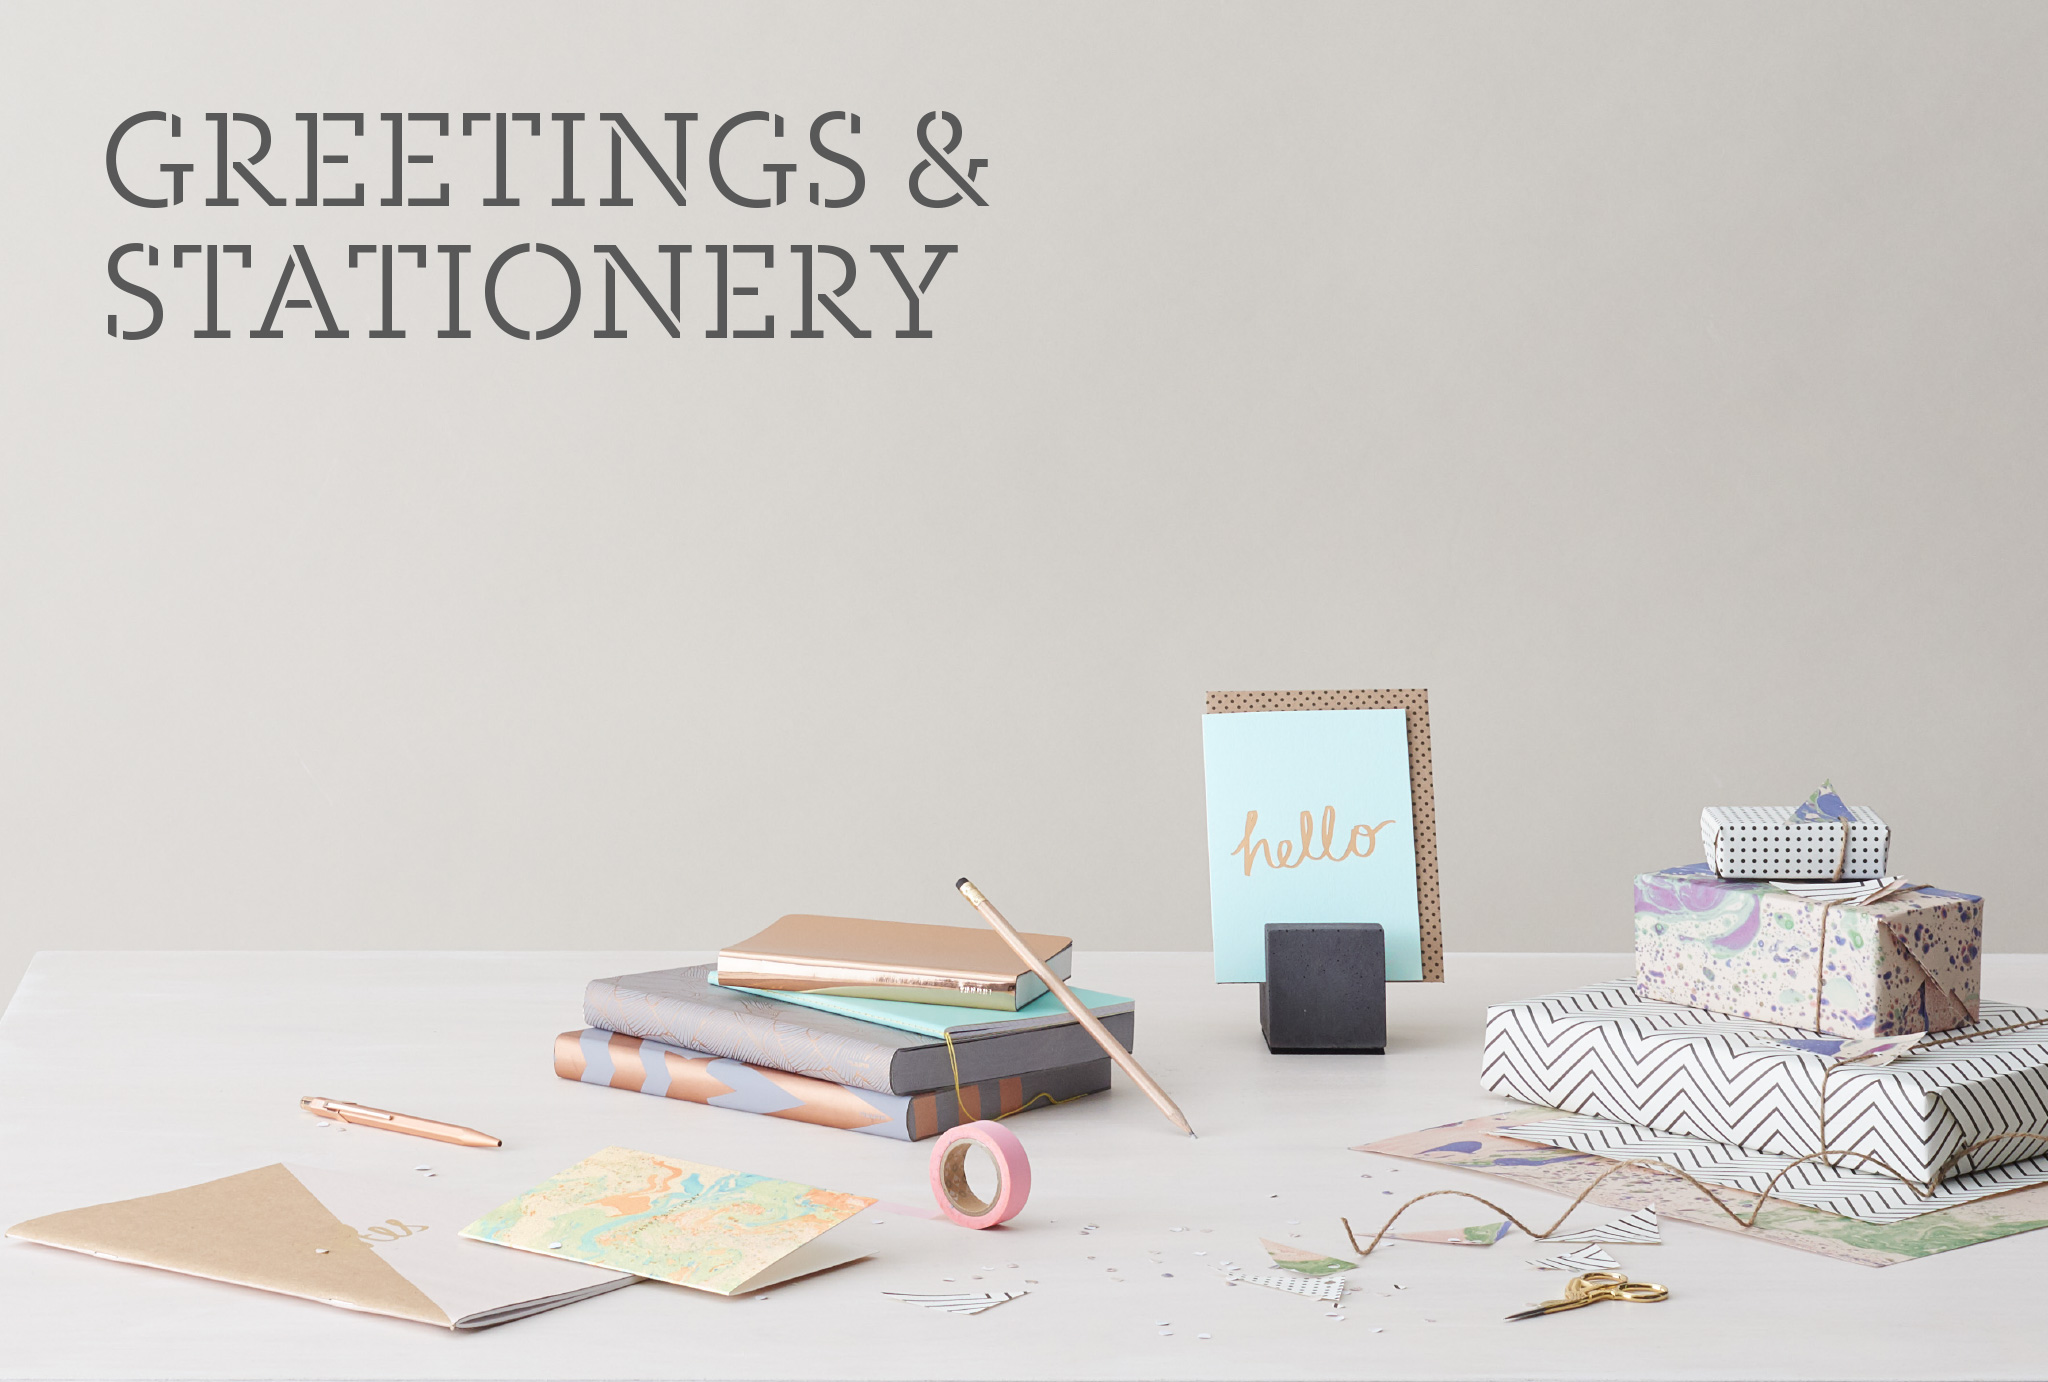 ‘GREETINGS & STATIONERY’ sector photography